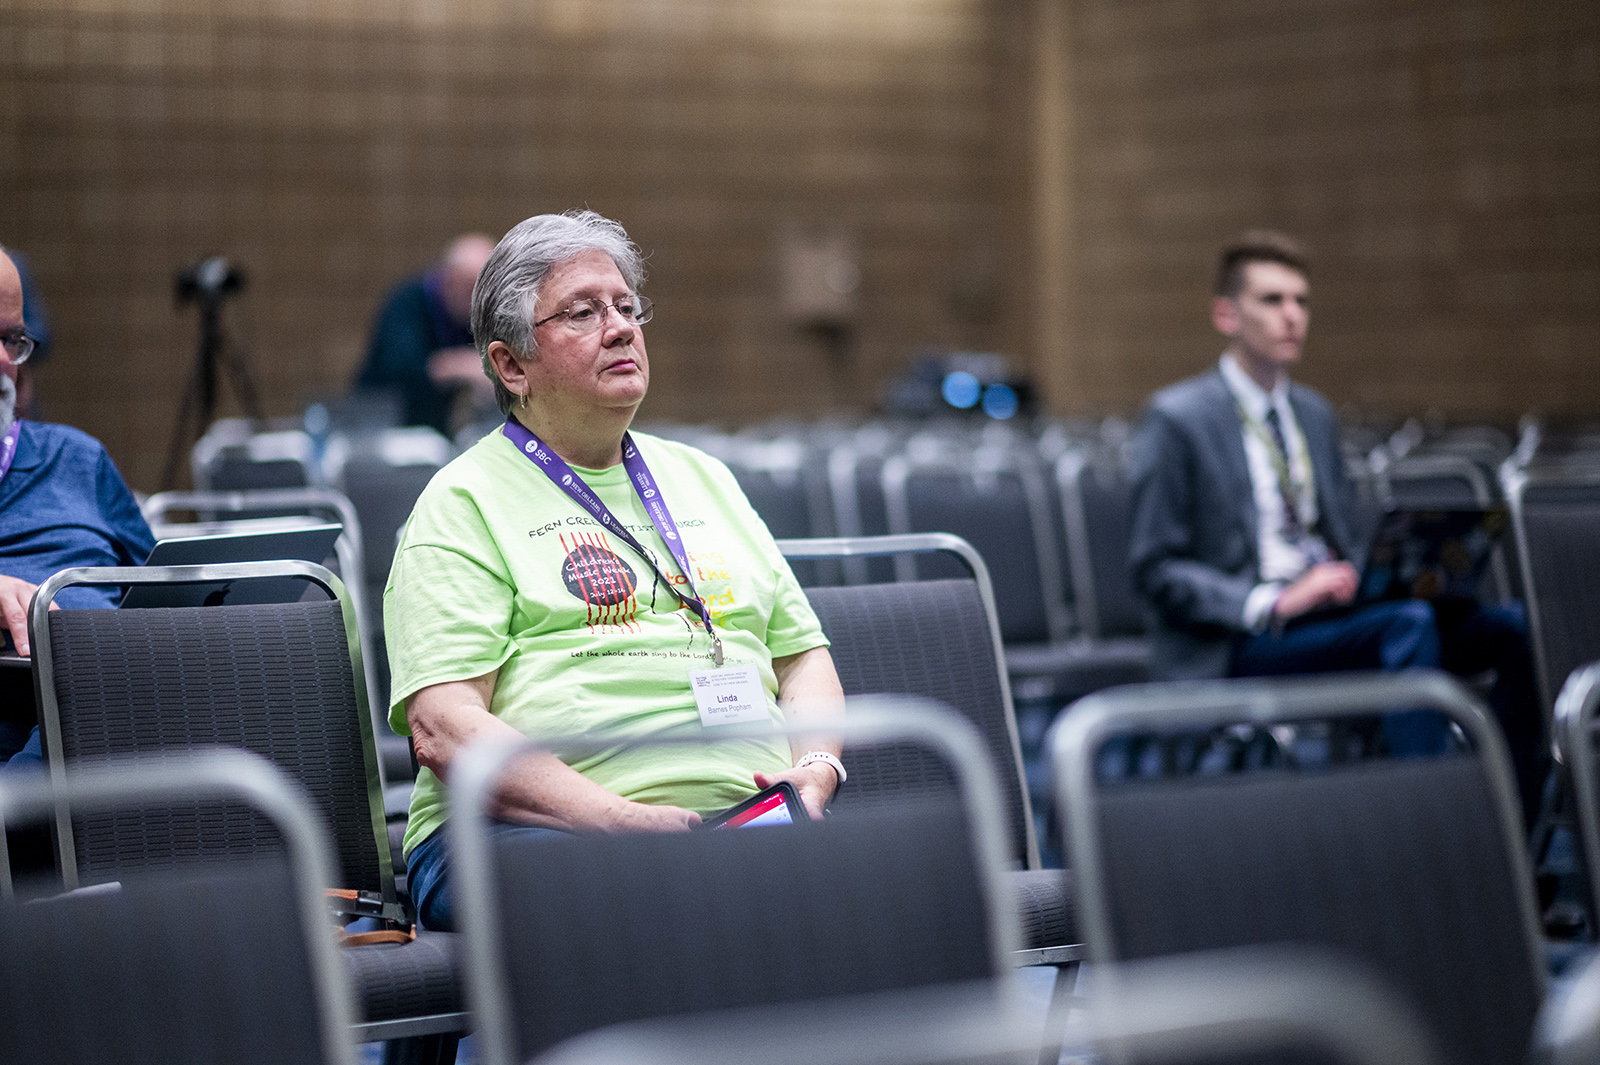 The Rev. Linda Barnes Popham at the Southern Baptist Convention annual meeting in New Orleans, Wednesday, June 14, 2023. RNS photo by Emily Kask